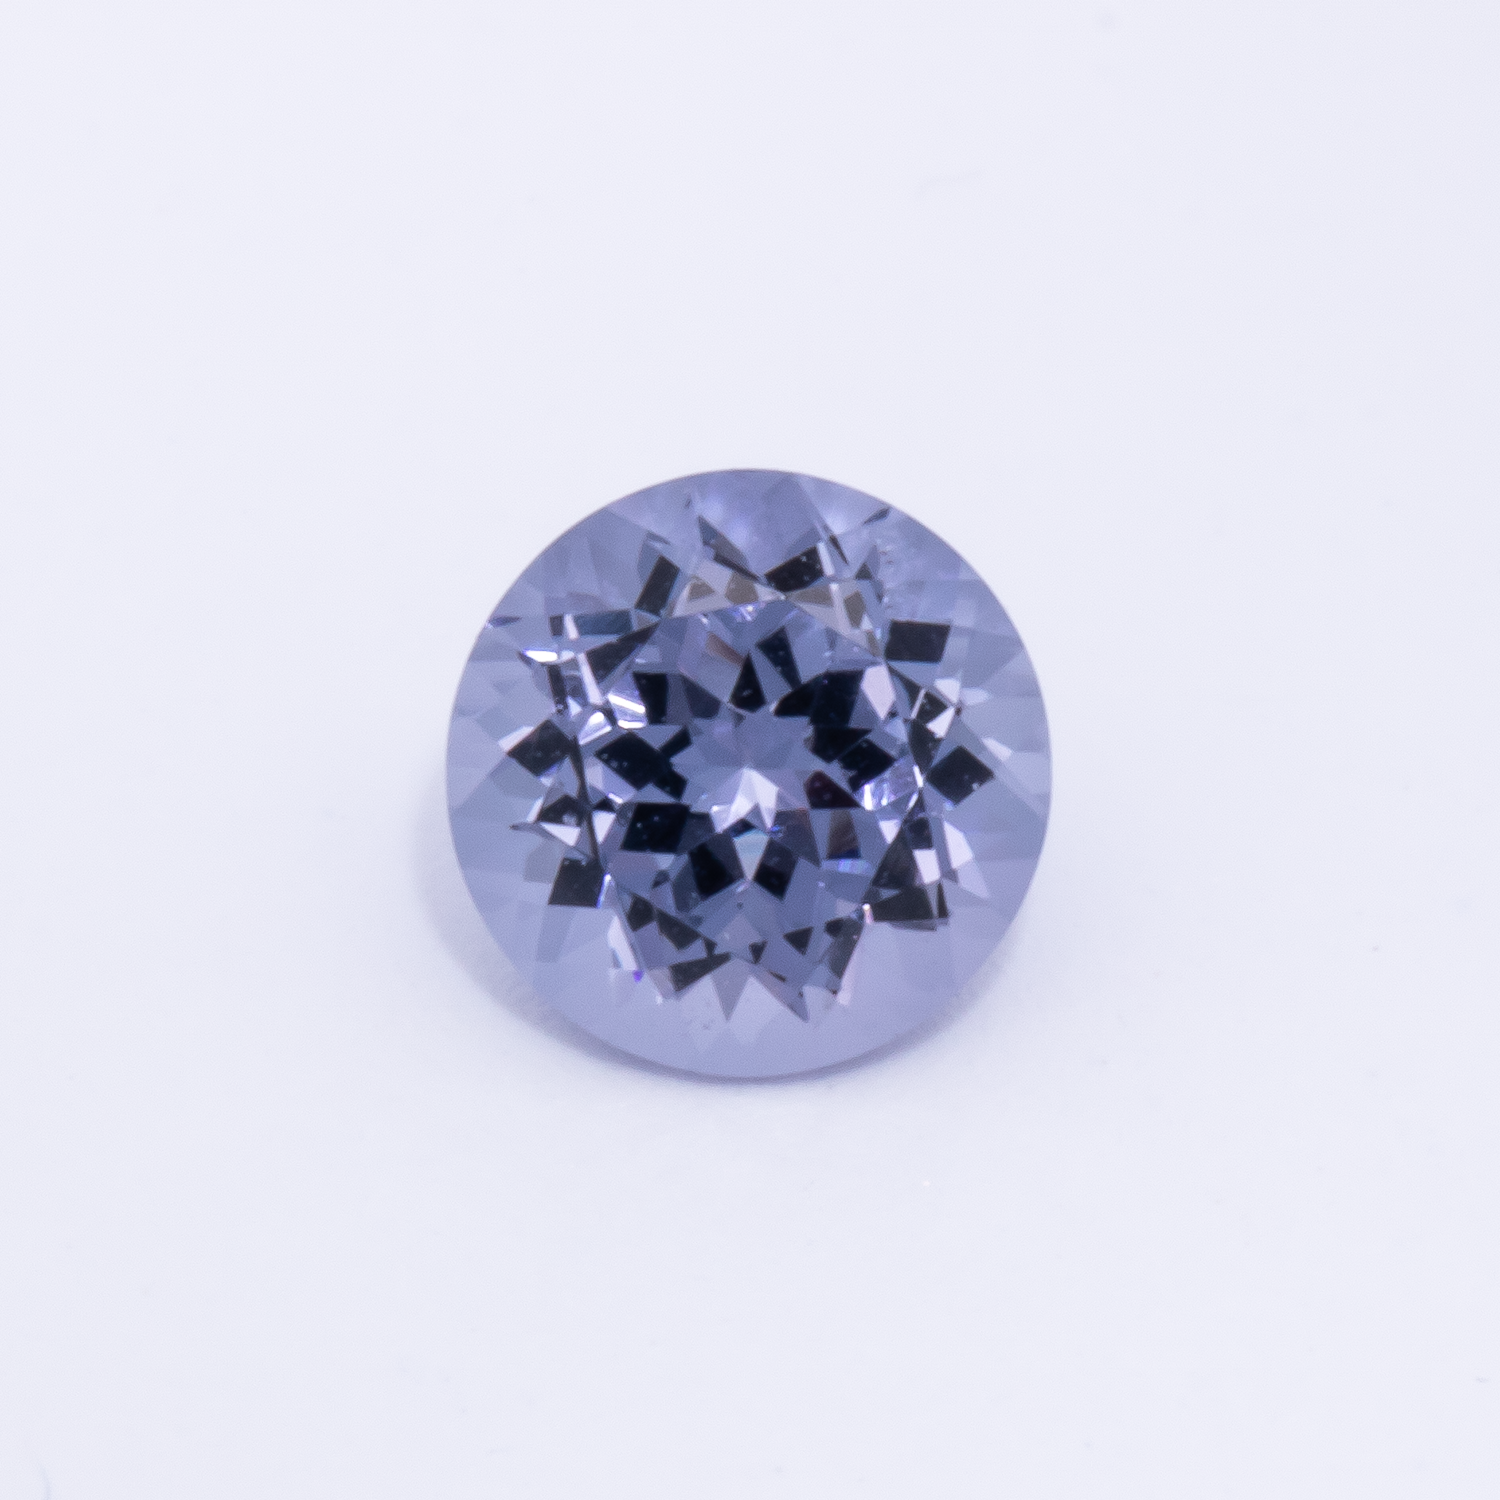 Spinell - lila, rund, 4.5x4.5 mm, 0.44 cts, Nr. SP90059